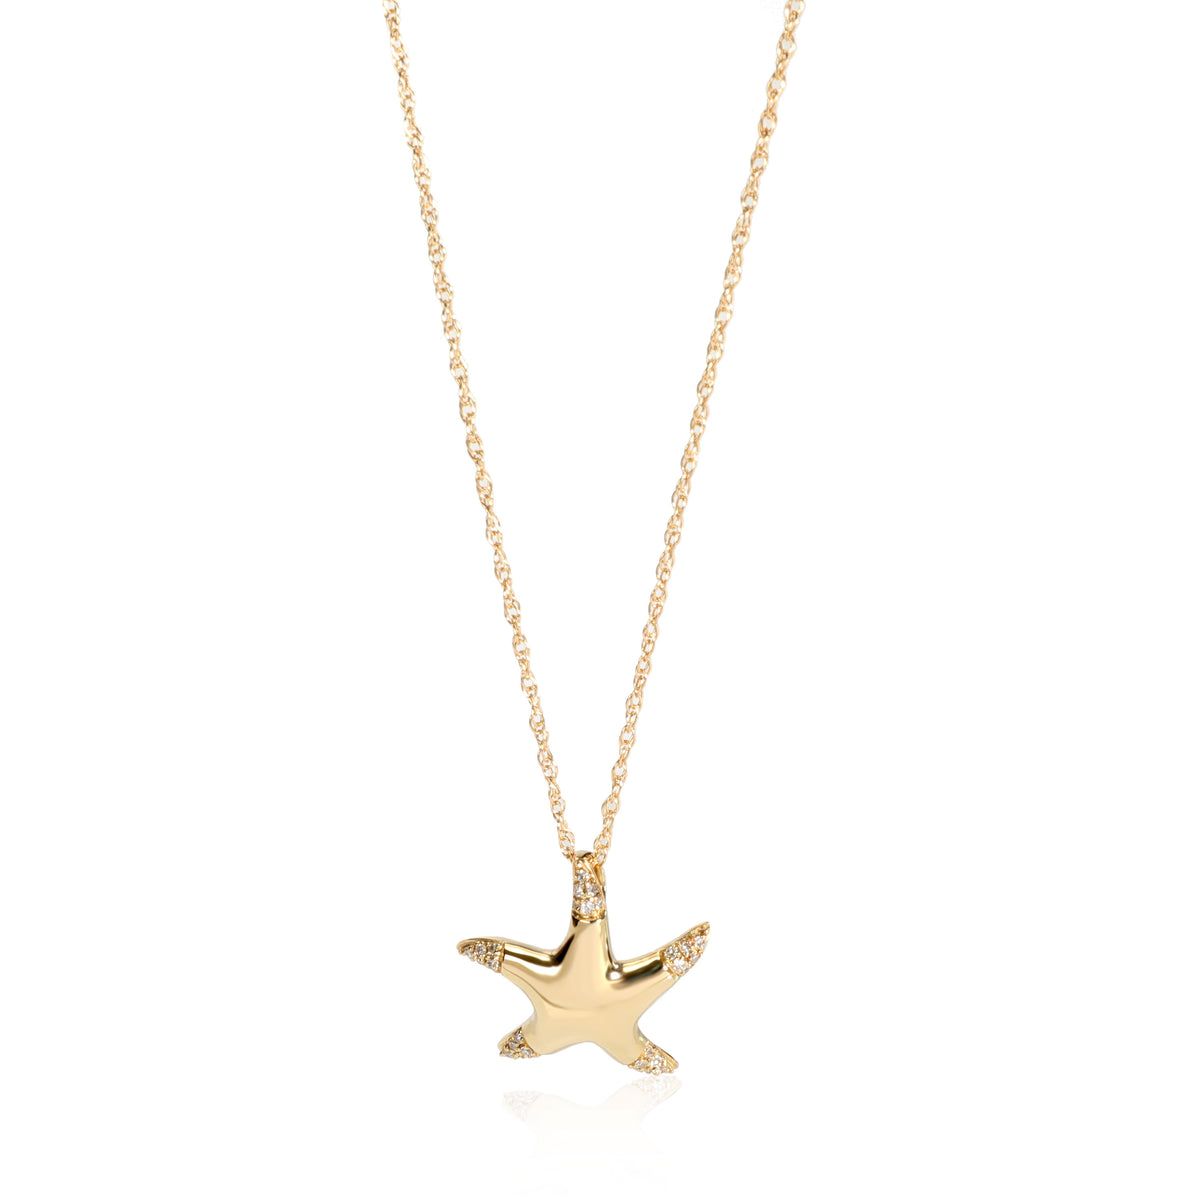 Pave Diamond Starfish Pendant Necklace in 14K Yellow Gold 0.09 ctw